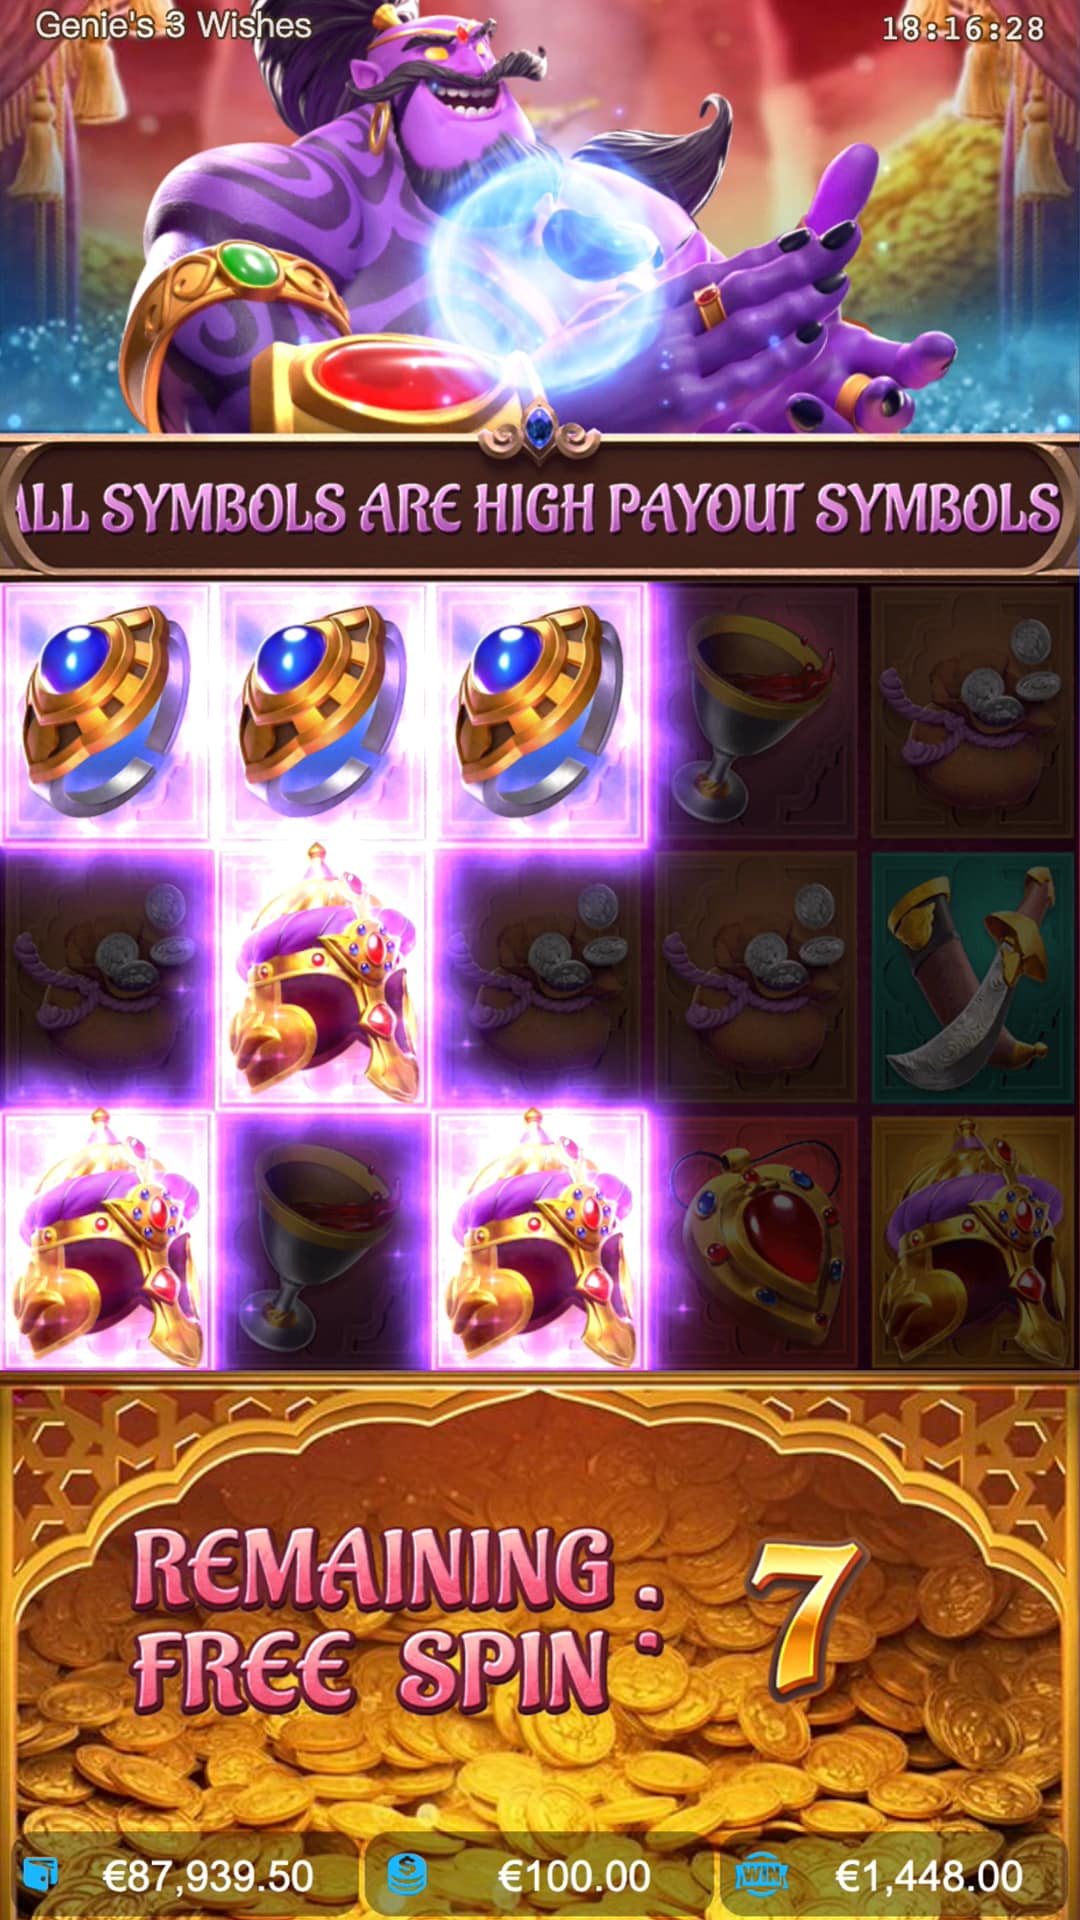 pg genie 3 wishes 12 free spins high payout symbols en 1